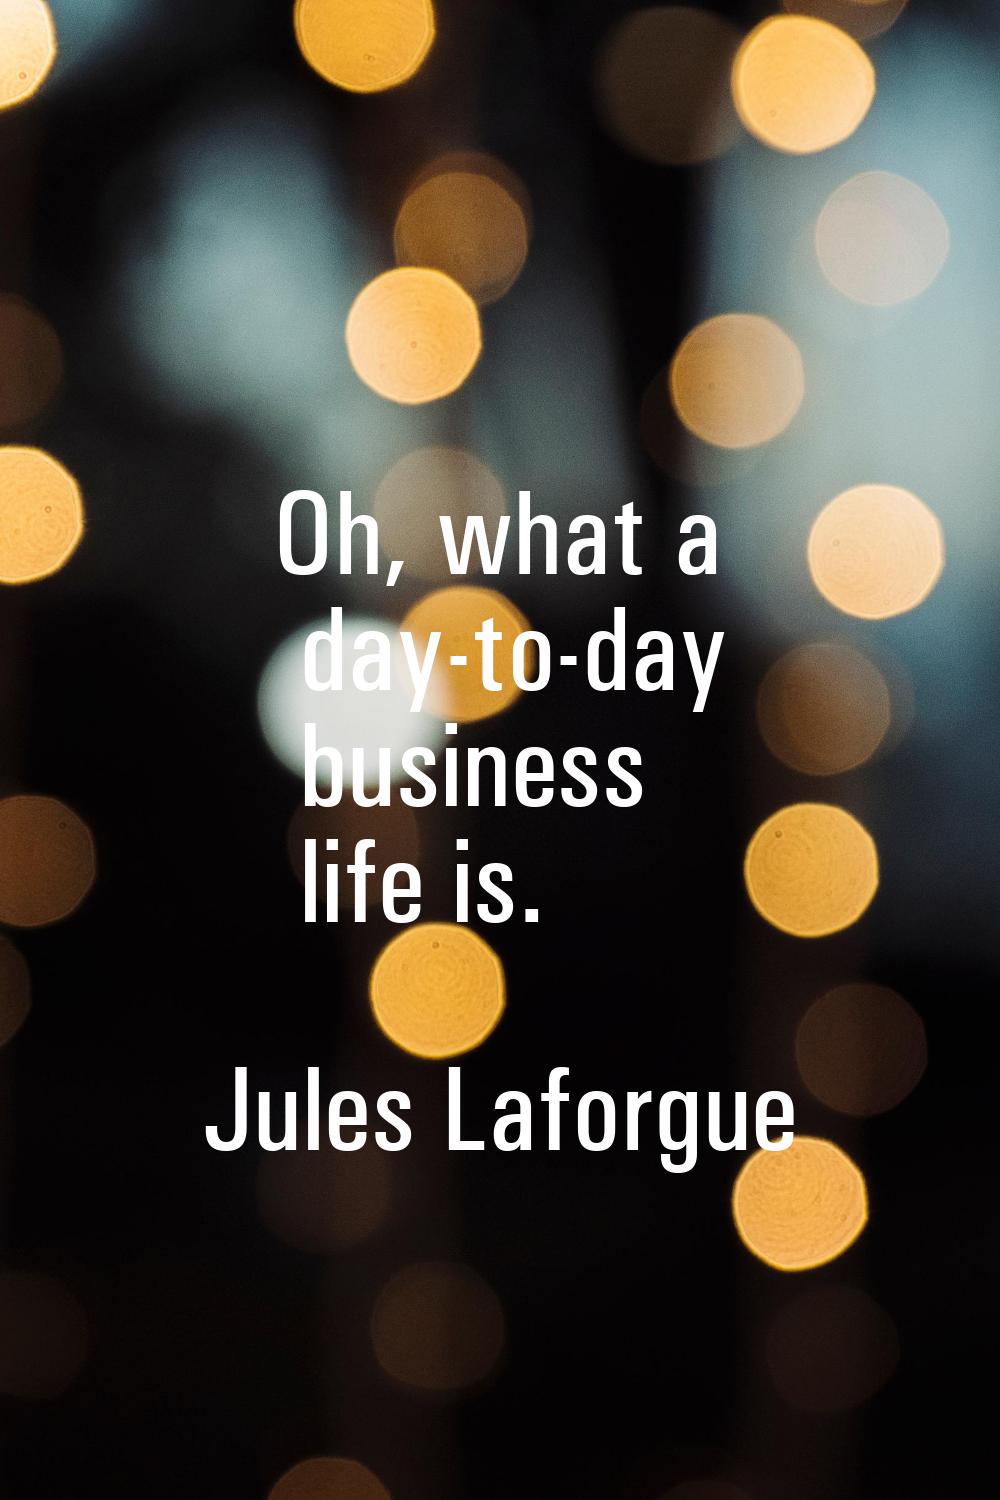 Oh, what a day-to-day business life is.